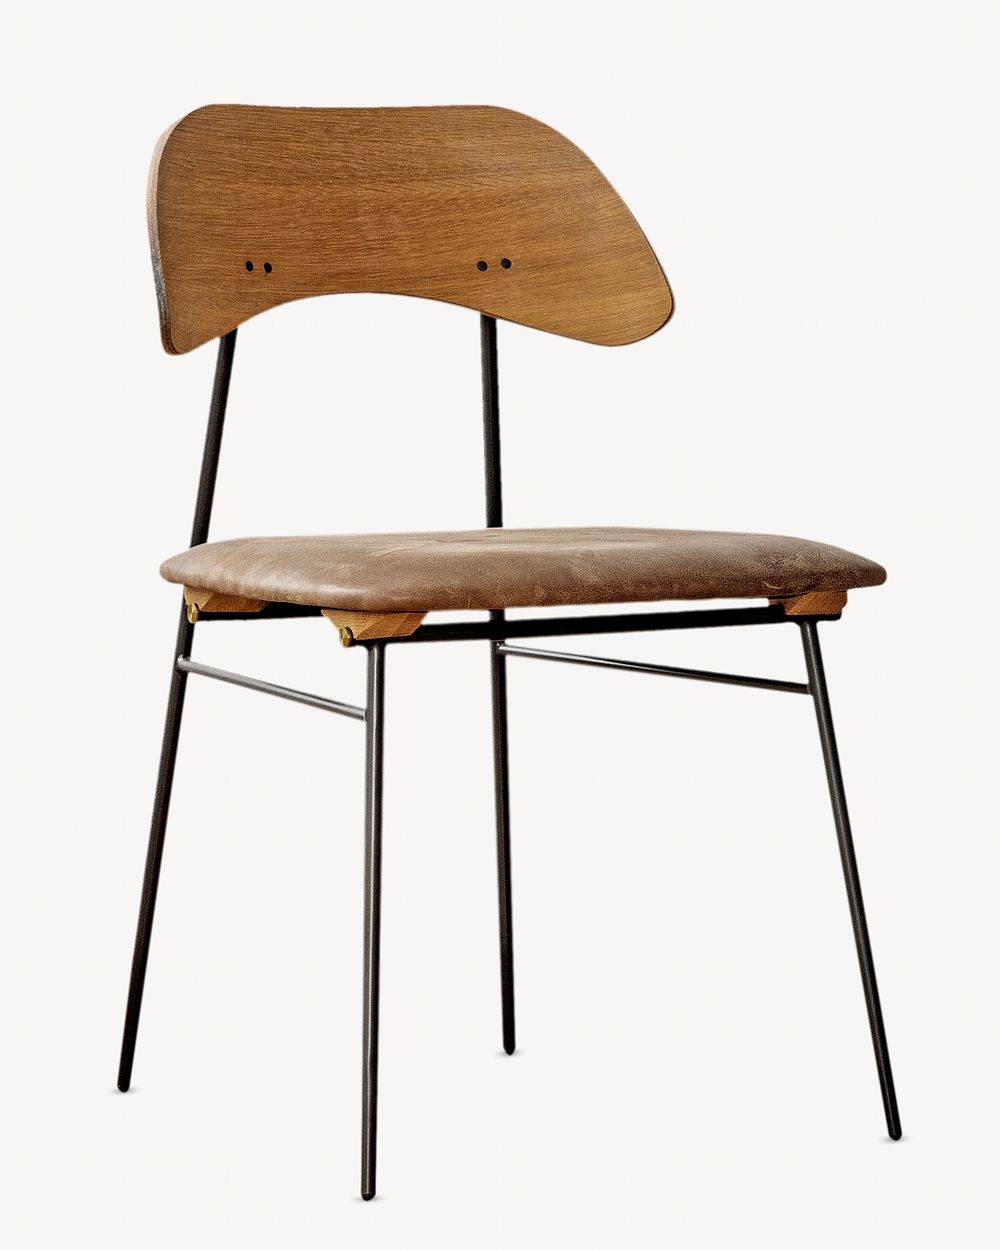 Wooden chair, isolated object